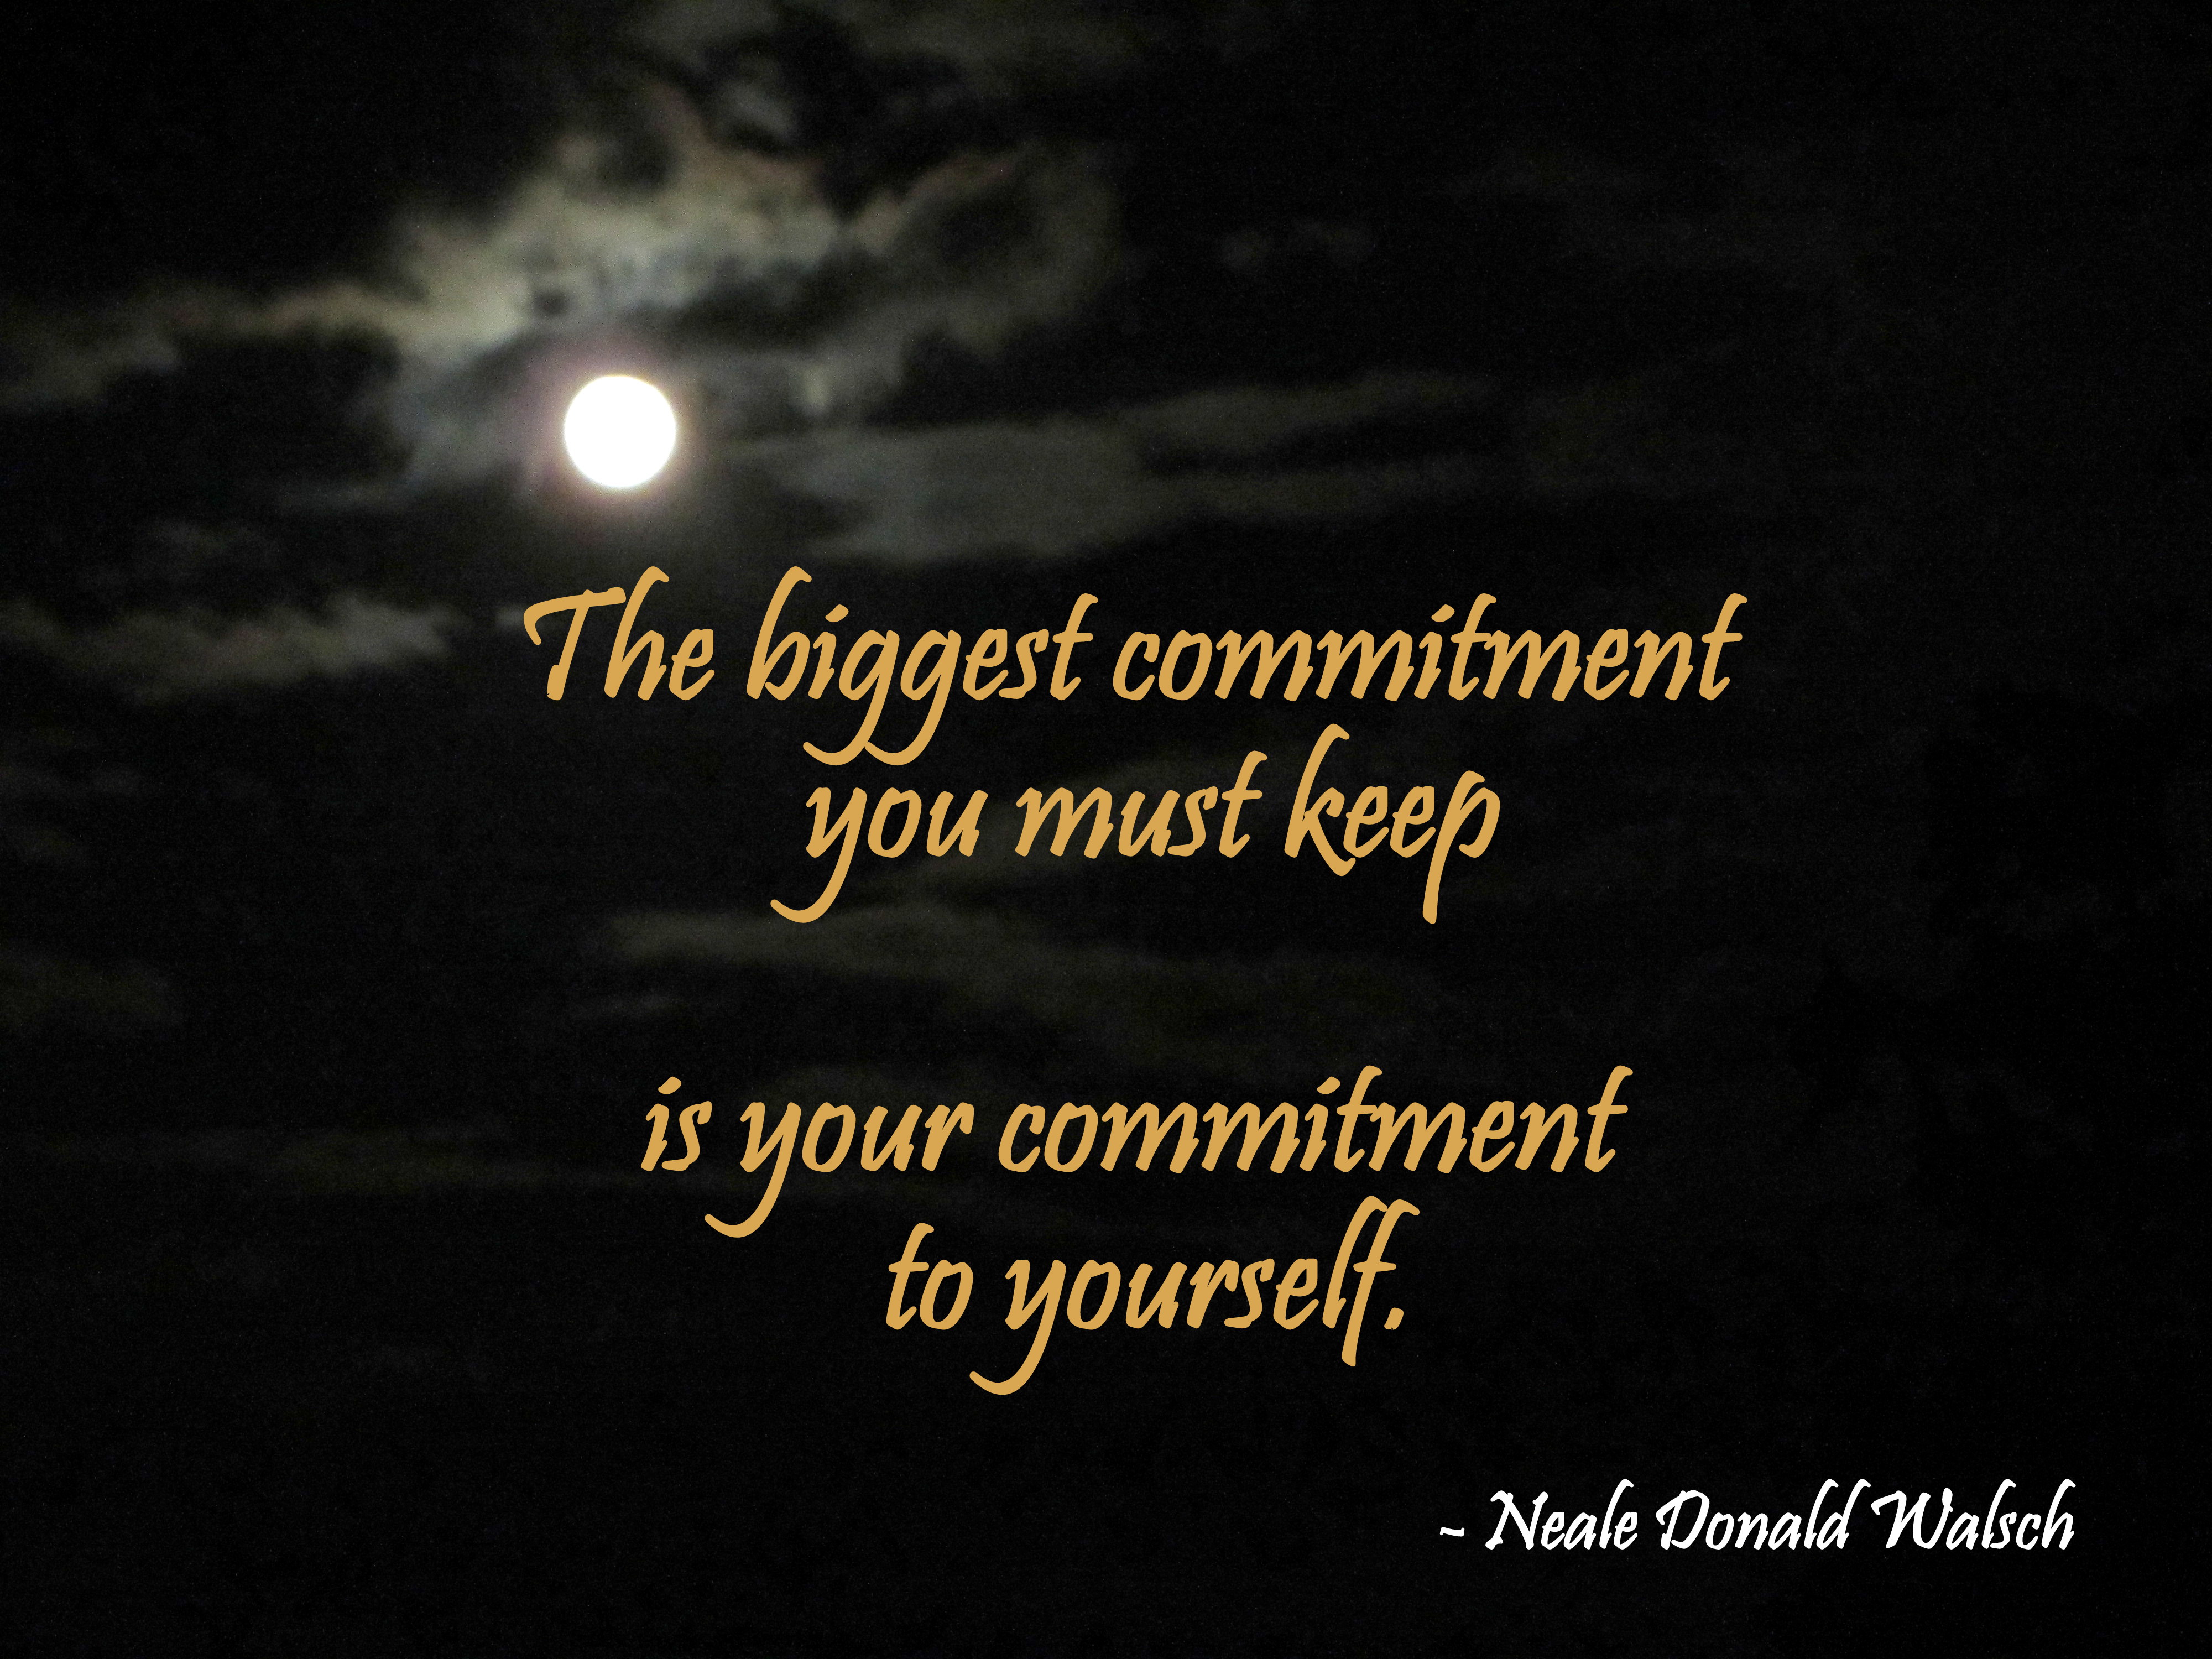 The biggest commitment you must keep is your commitment to yourself. Neale Donald Walsch